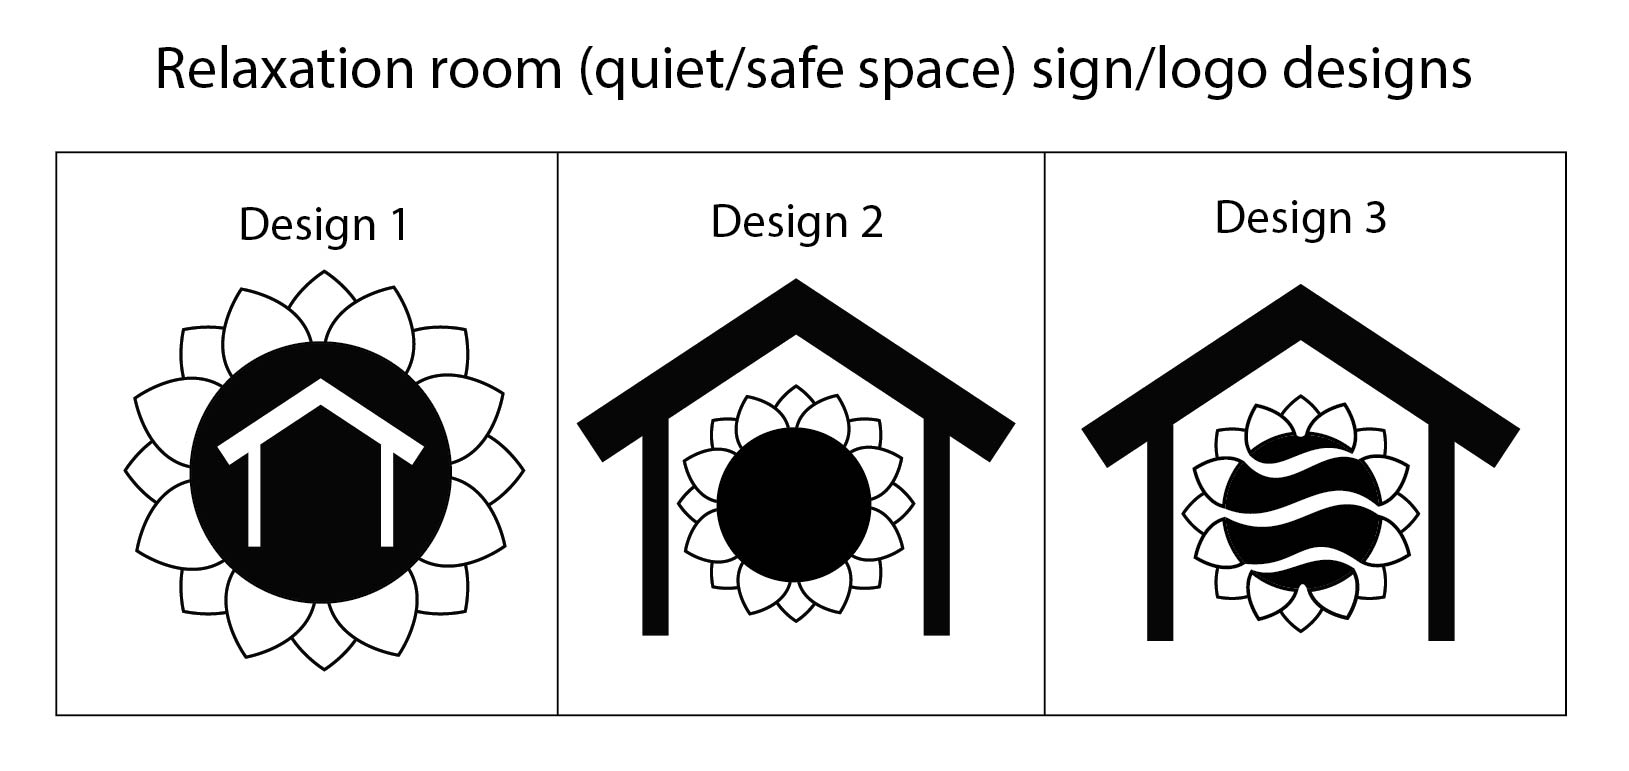 relaxation_room_sign_designs.jpg